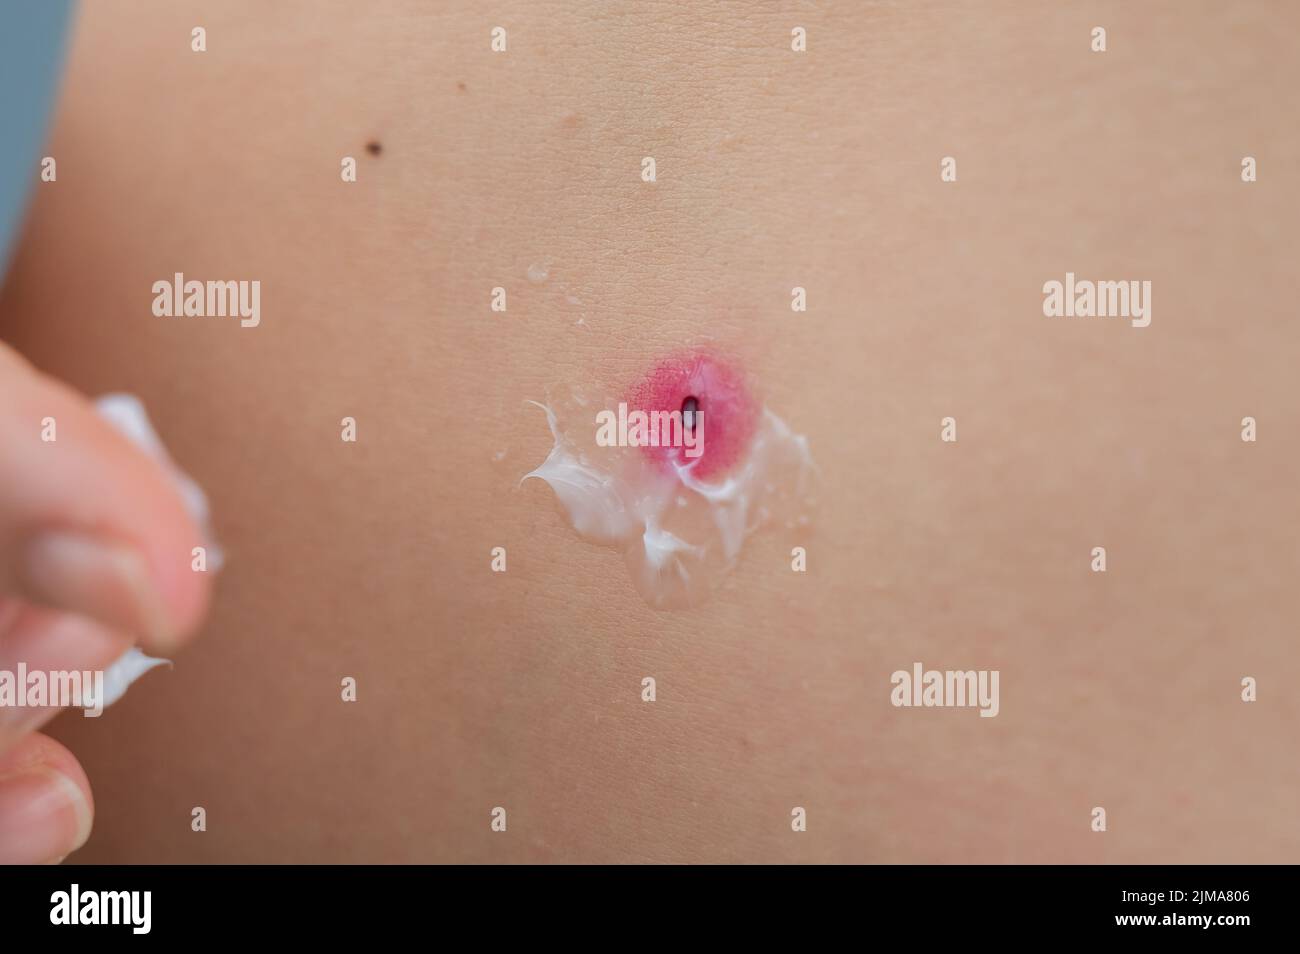 A woman smears cream on a wound after burning a wart.  Stock Photo